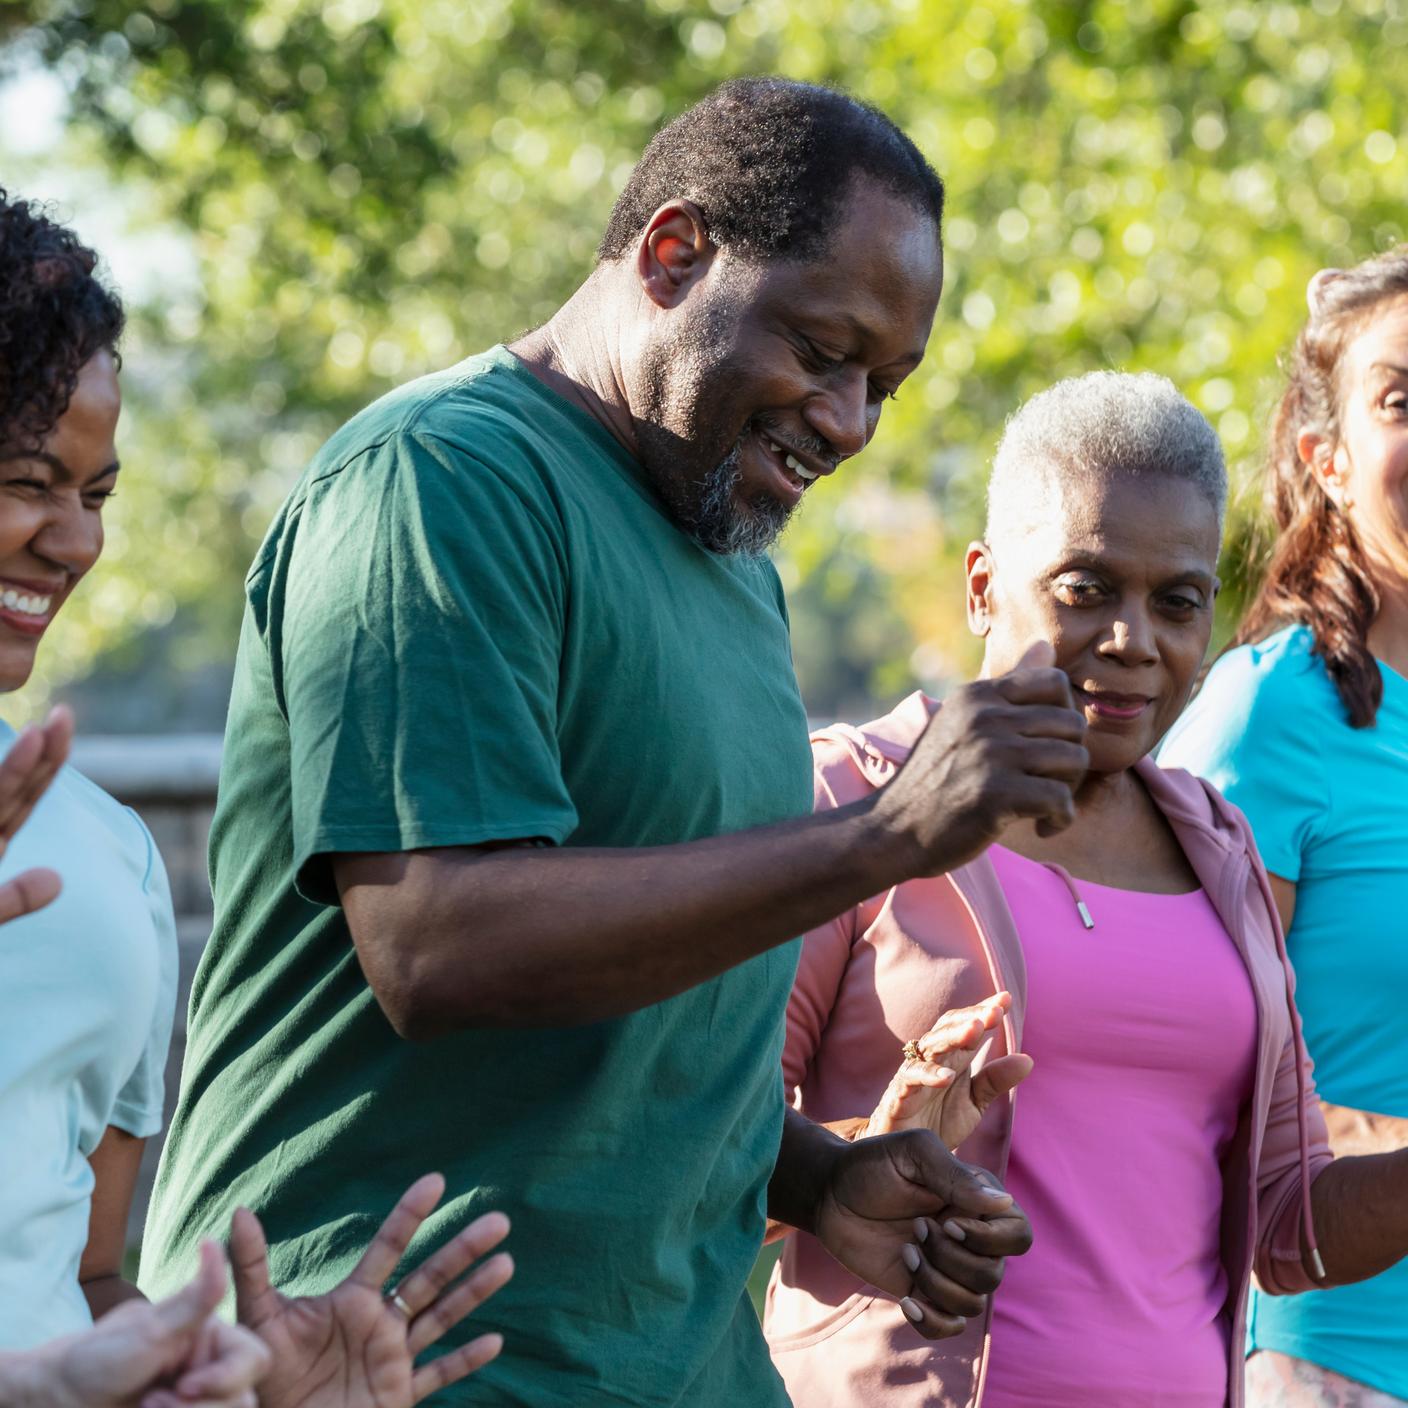 A multiracial group of five adults in a dance exercise class at the park